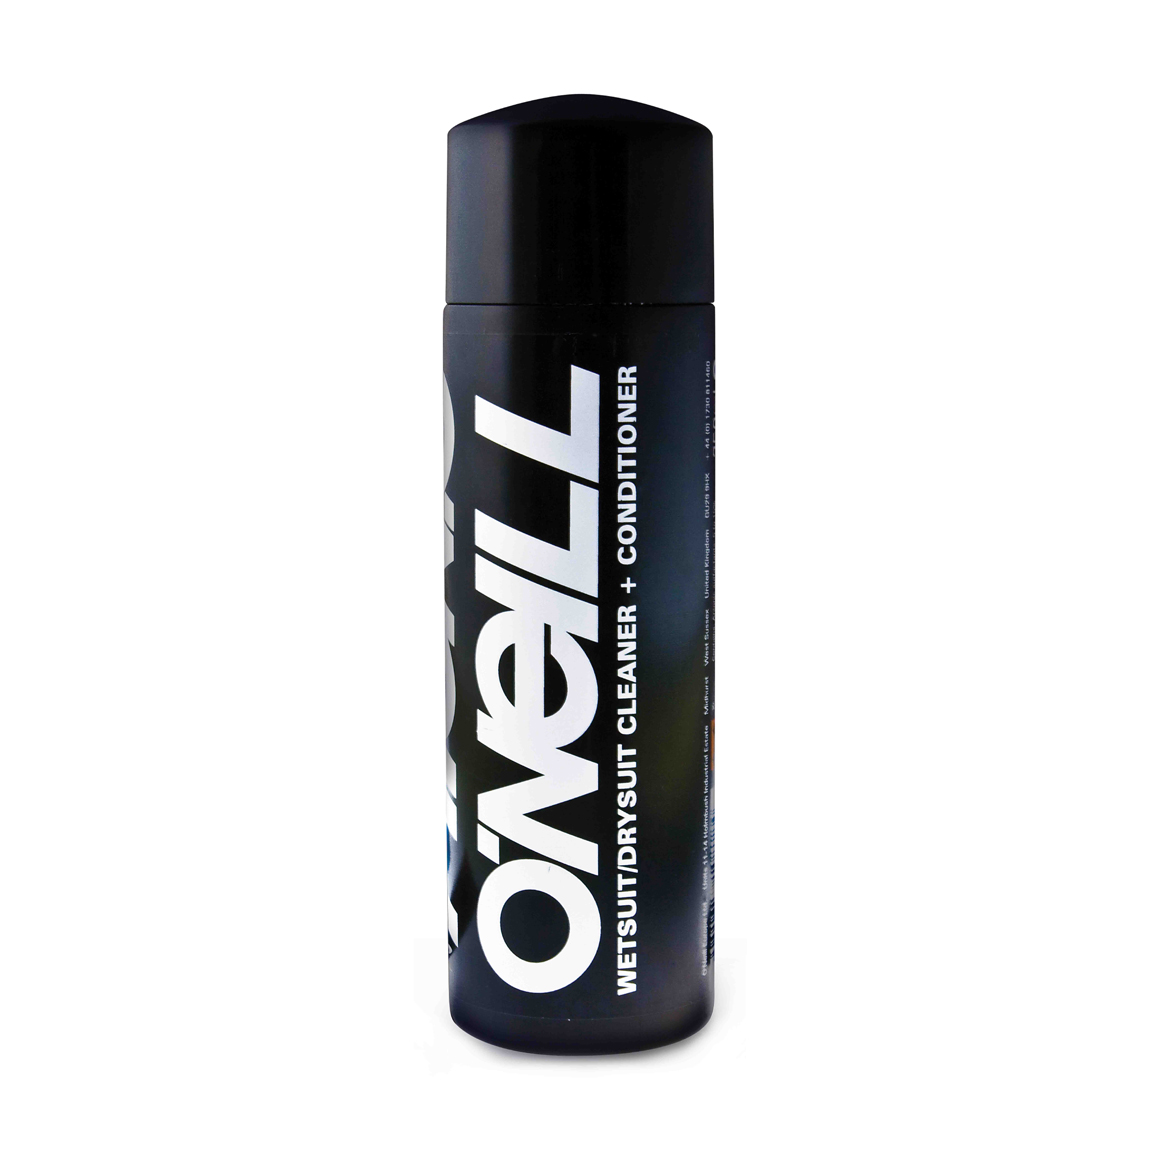 O’Neill Wetsuit Drysuit Shampoo and Conditioner